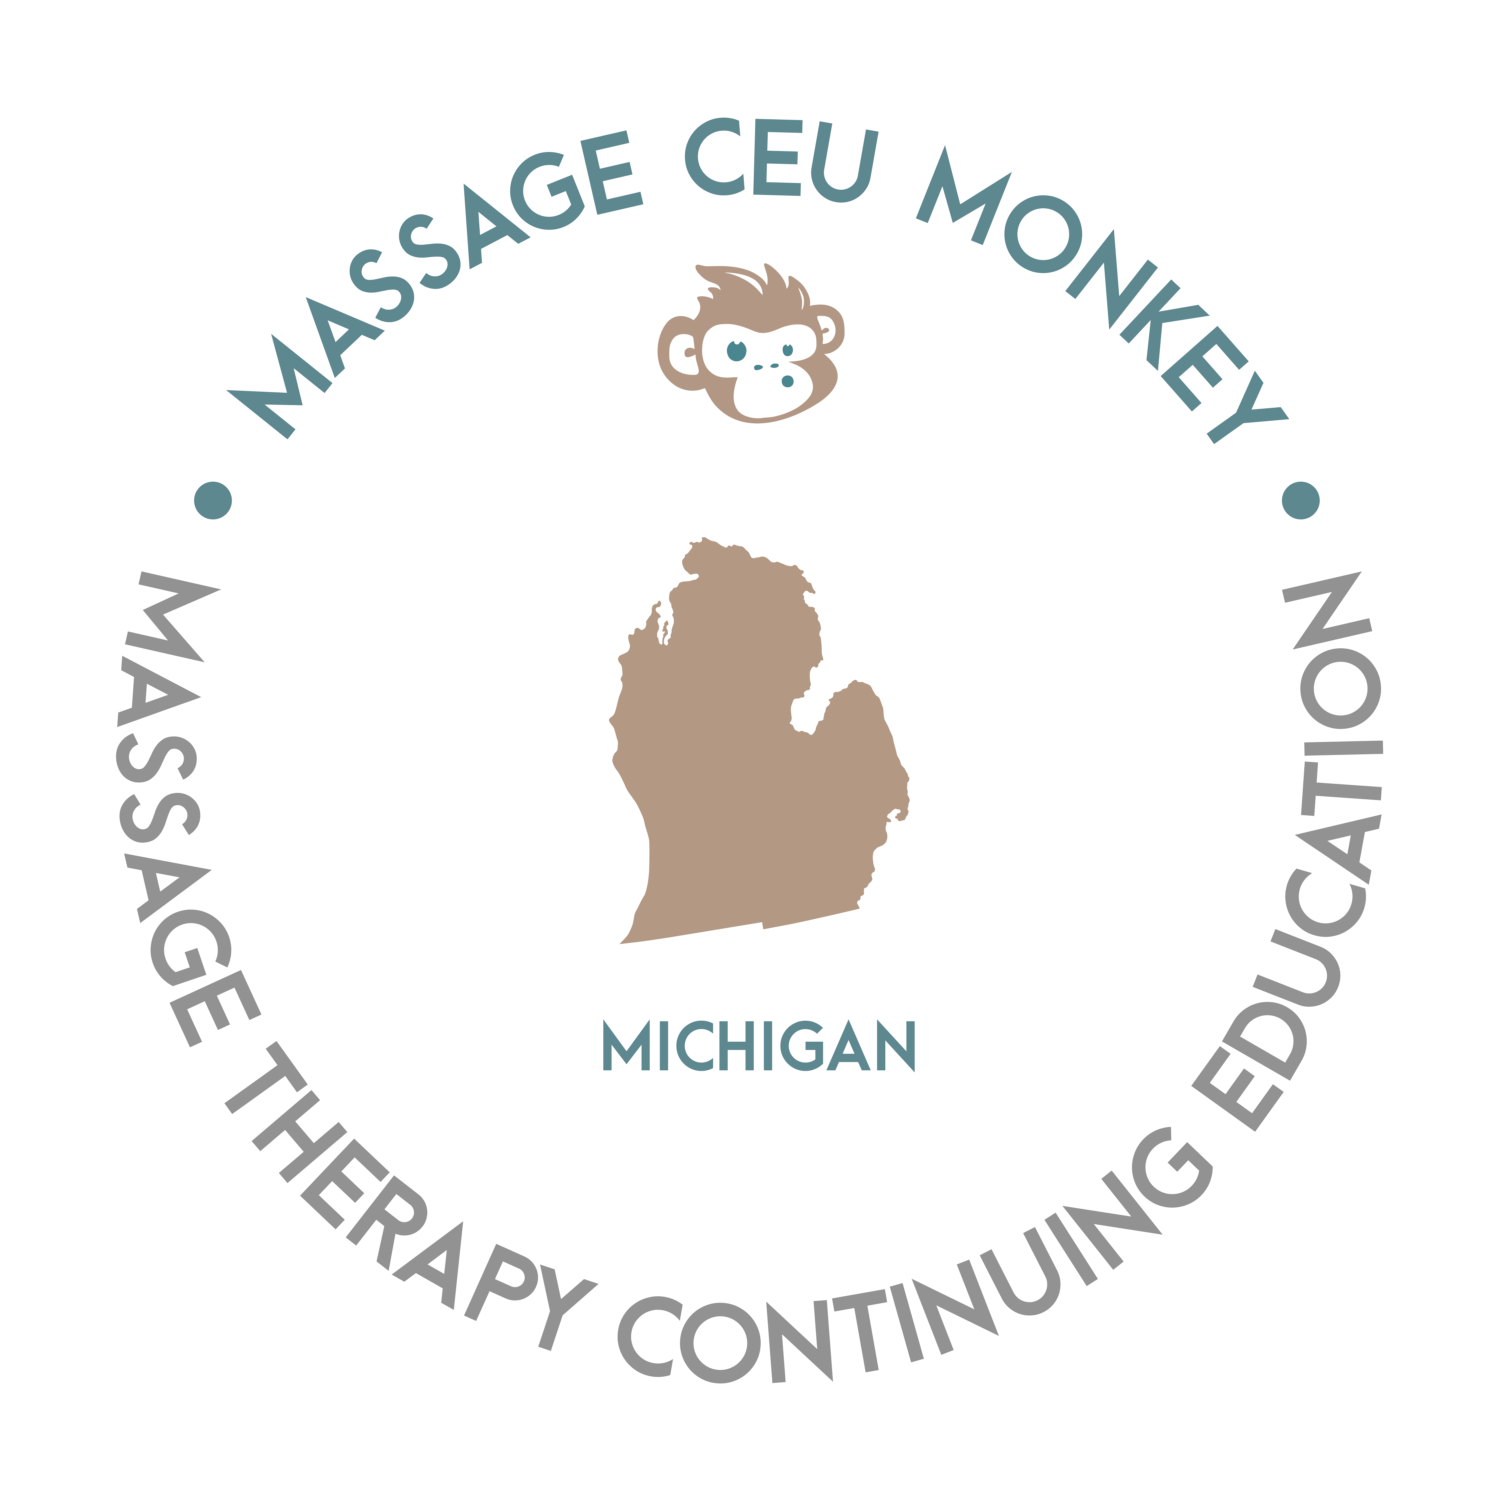 Michigan Massage Therapy Continuing Education Requirements & Online Courses